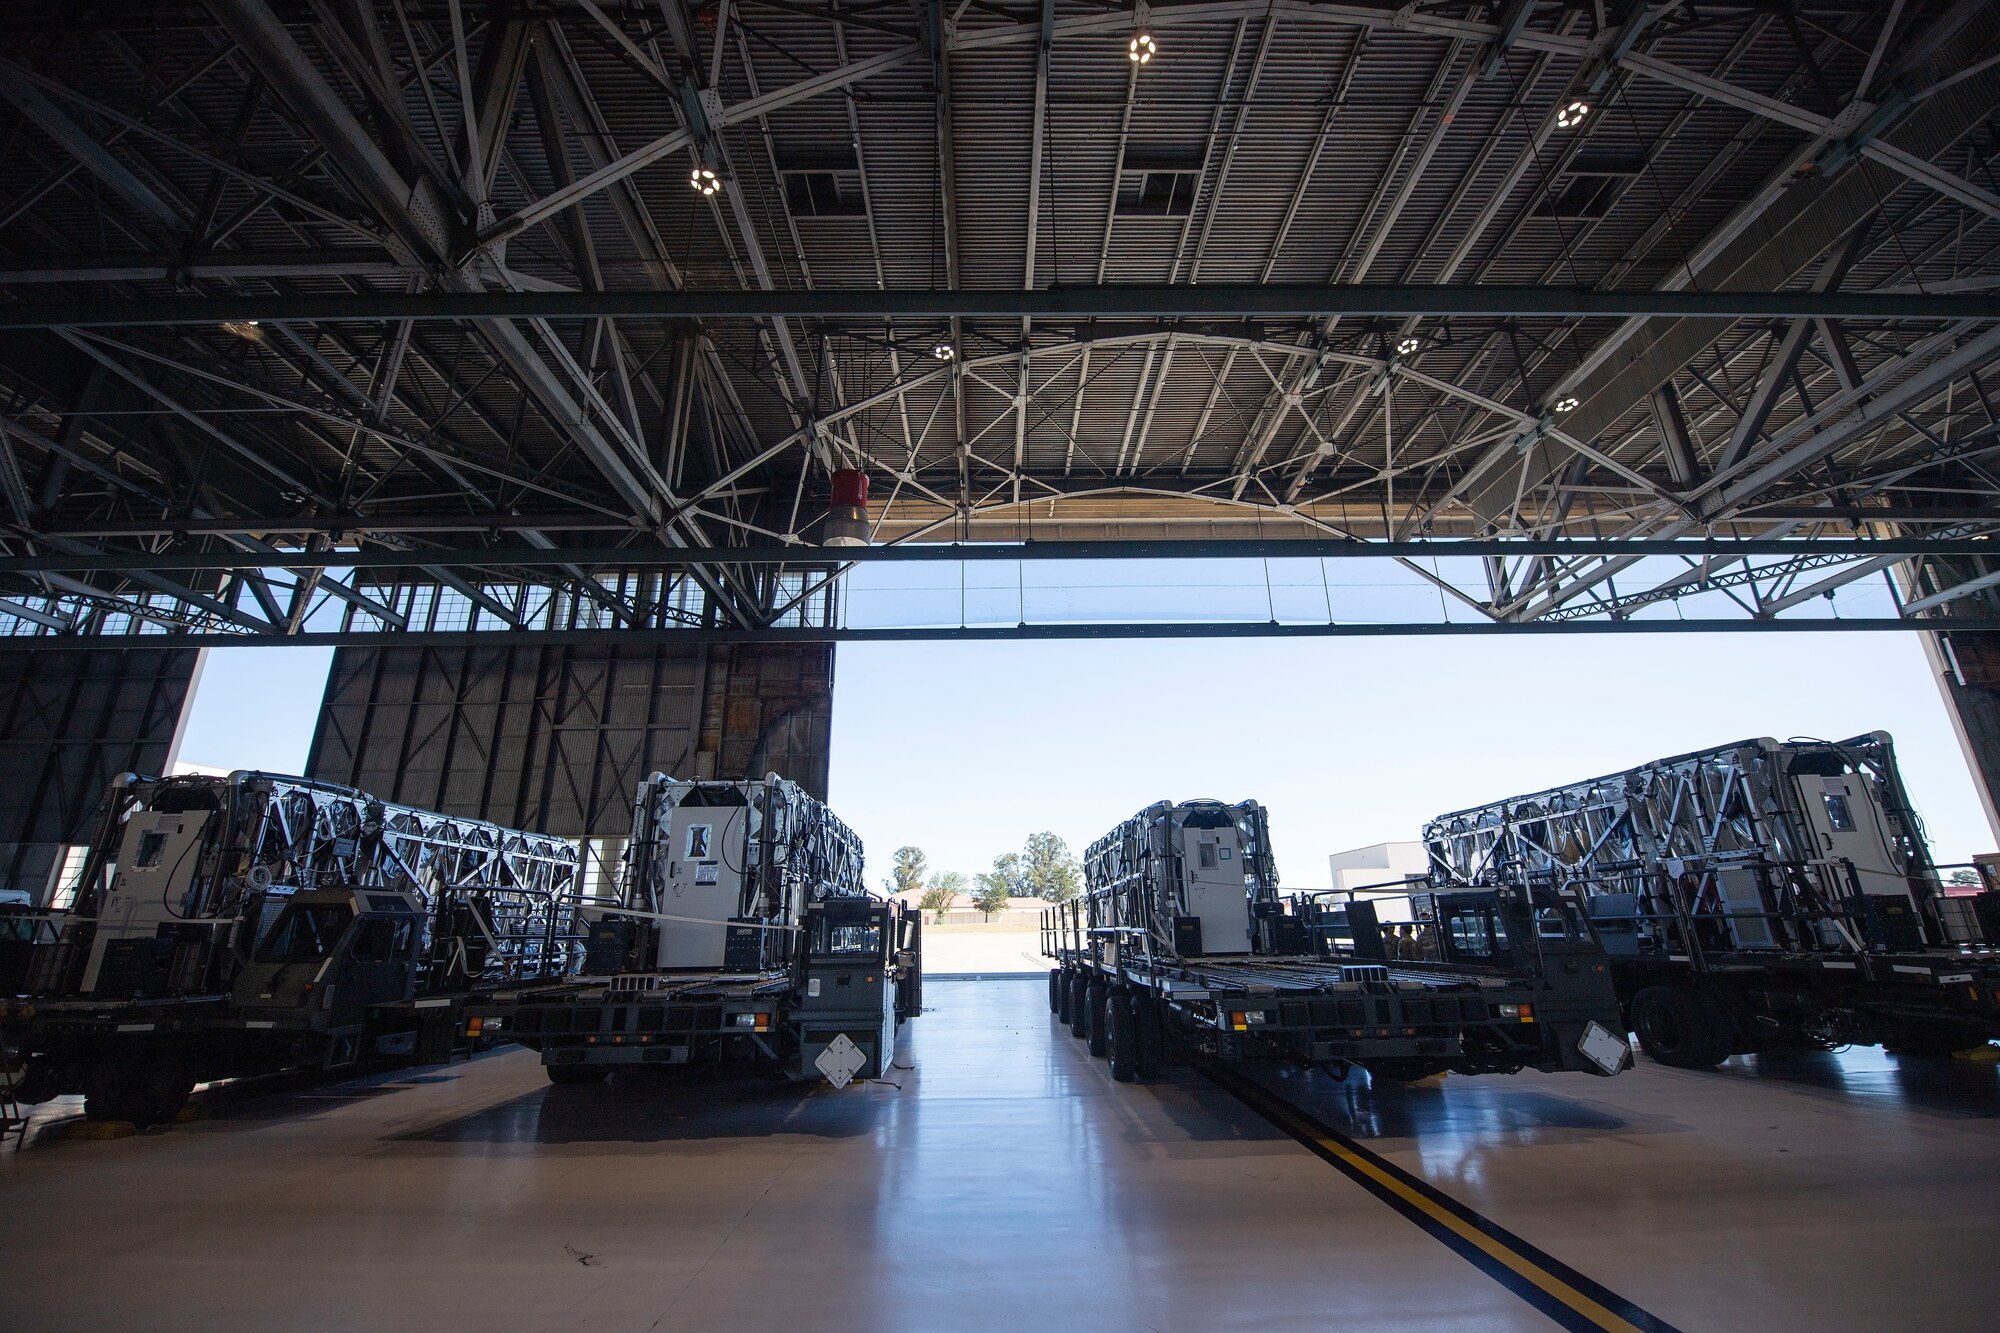 Transport Isolation System capsules are positioned on respective cargo K loaders in a hangar April 28, 2020, at Travis Air Force Base, California. TIS capsules, which were initially engineered in response to the Ebola virus in 2014, allow the transport of individuals with highly contagious diseases without infecting any other passengers or aircrew on the aircraft. (U.S. Air Force photo by Senior Airman Christian Conrad)